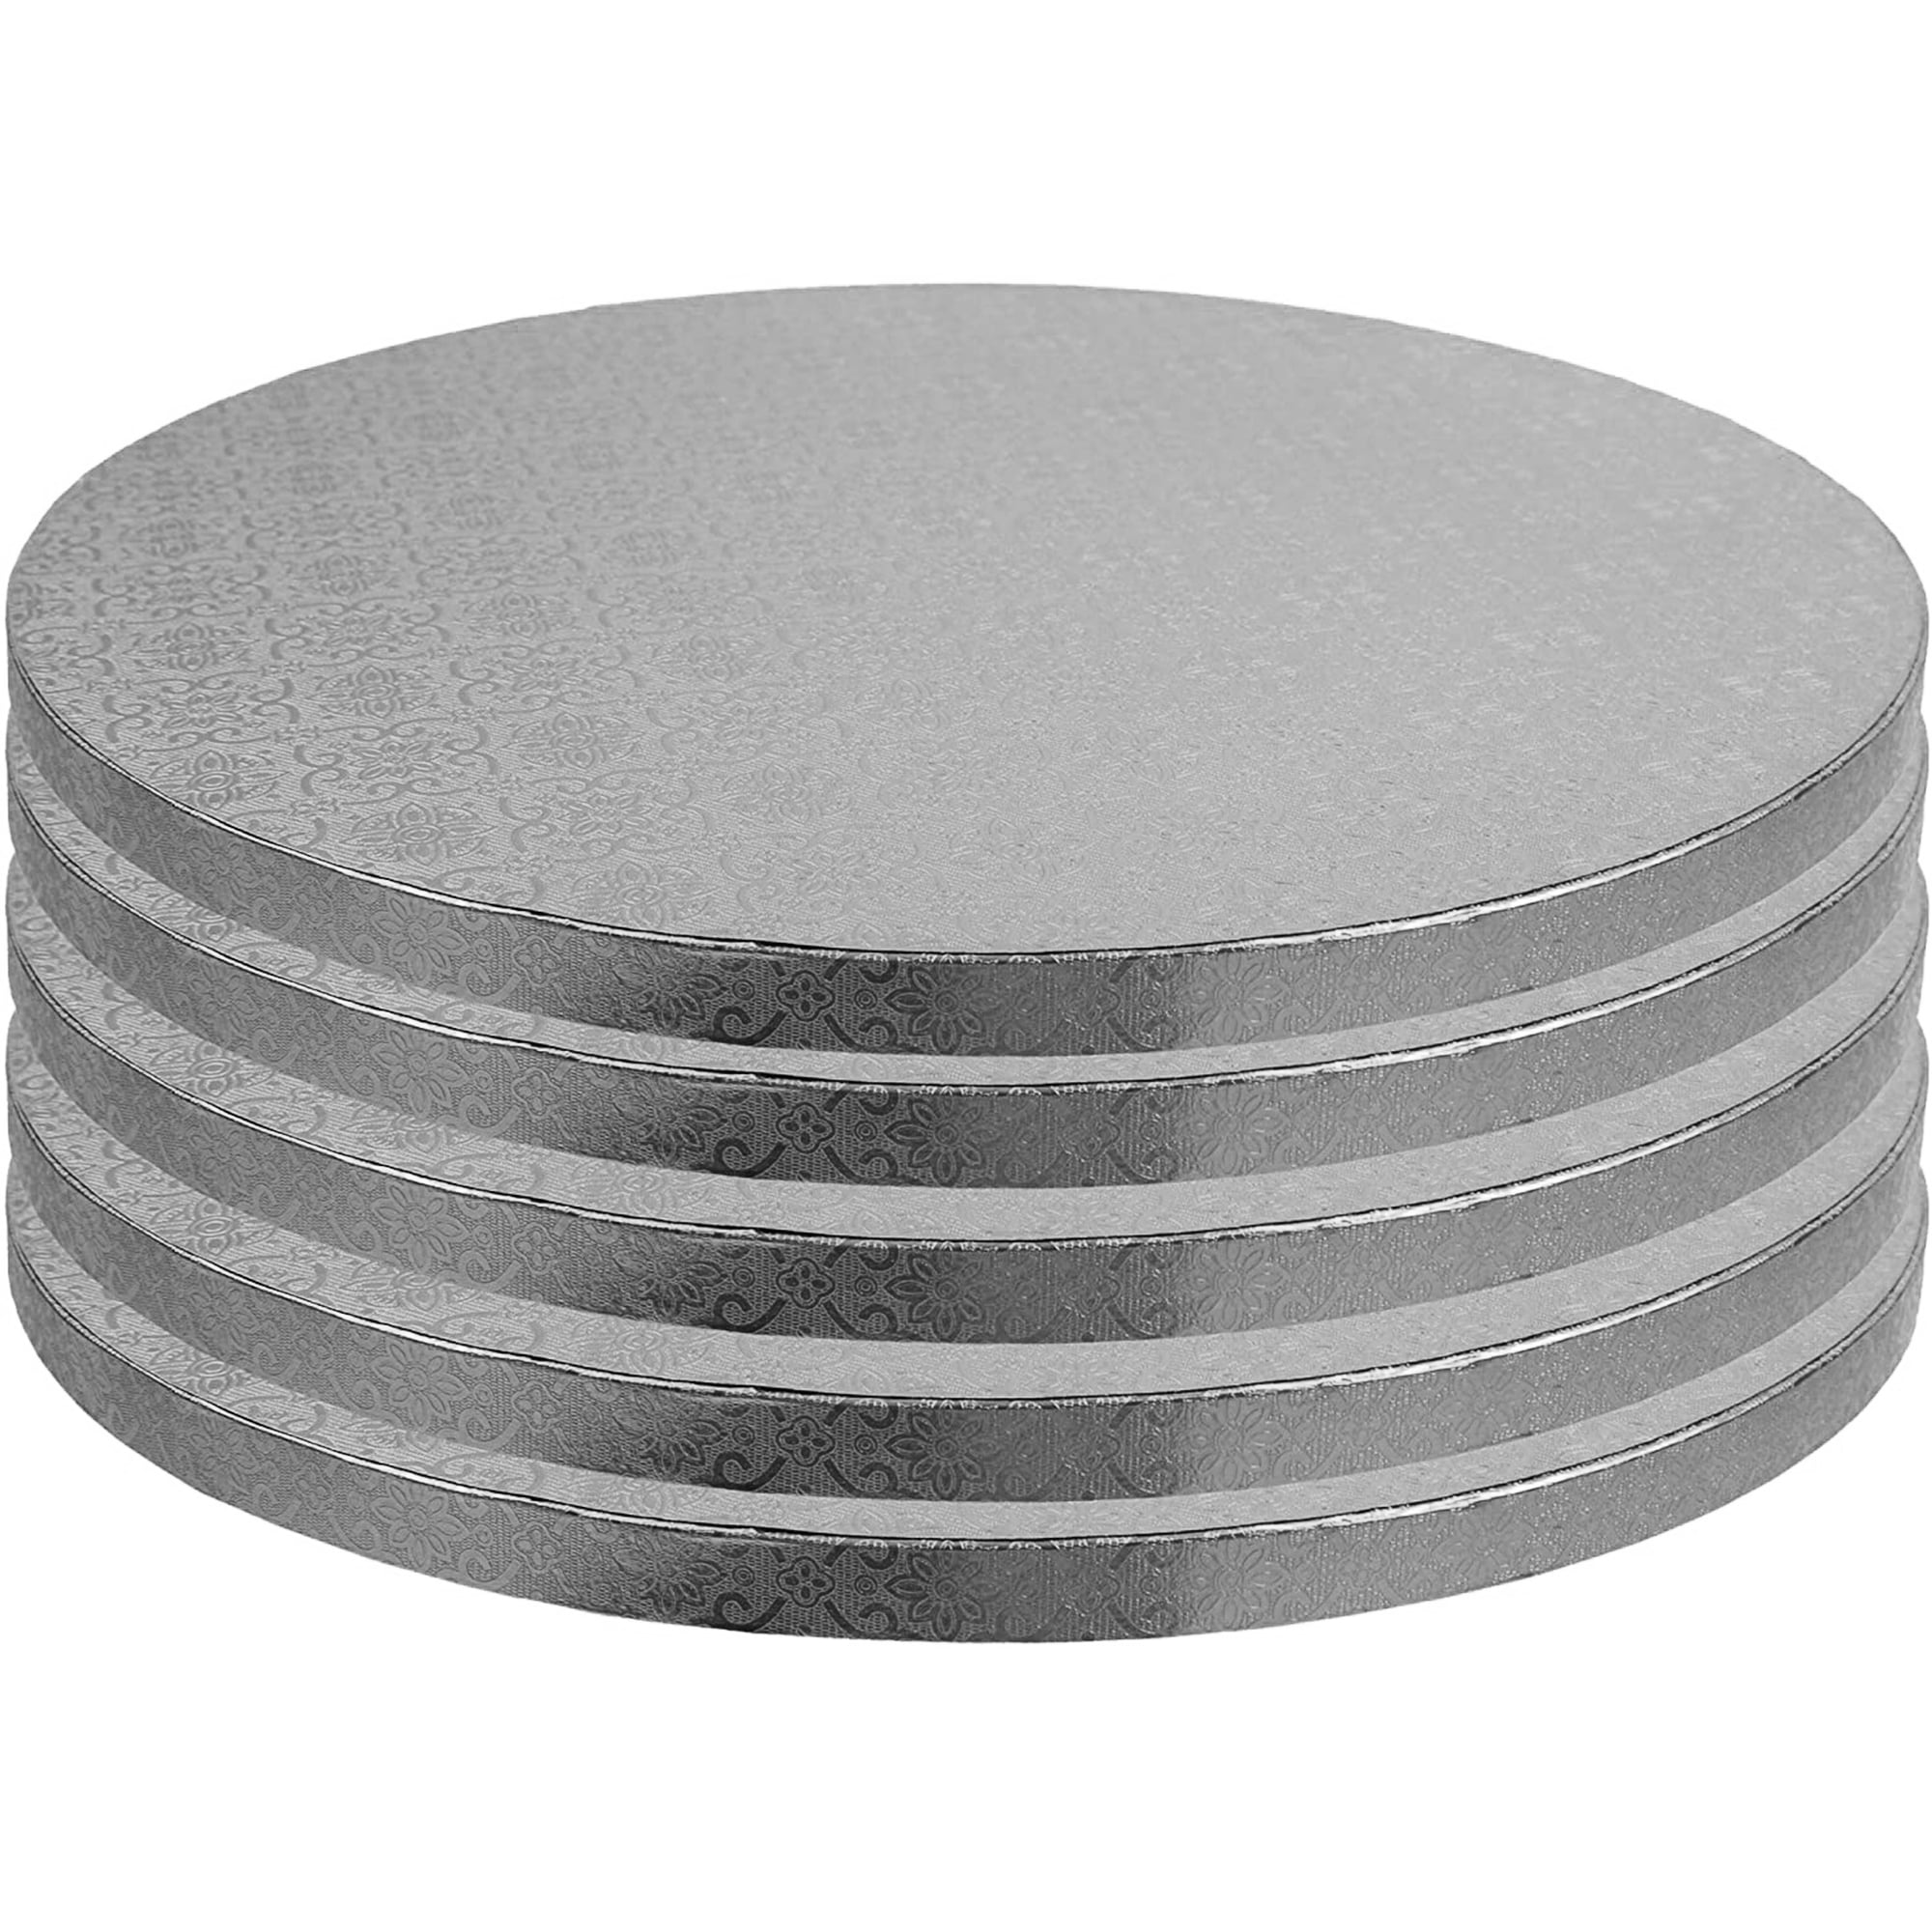 Spec101 Round Cake Drums 12pk White Cake Drum Boards with 1/2-Inch Thick Wrapped-Edges 12 Inch